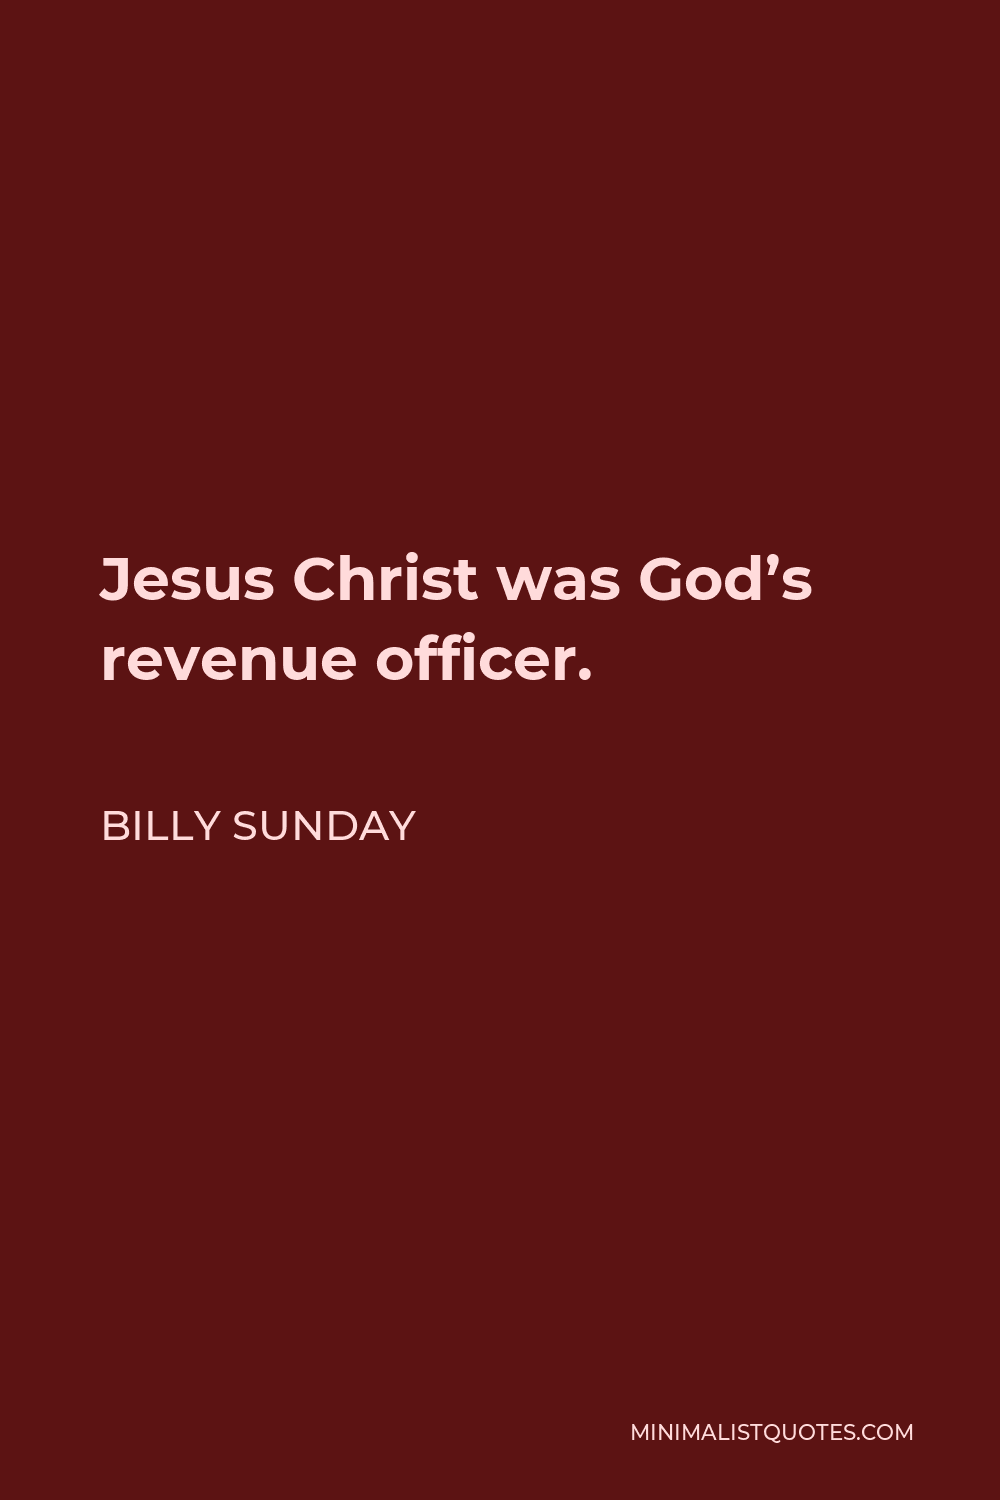 Billy Sunday Quote - Jesus Christ was God’s revenue officer.